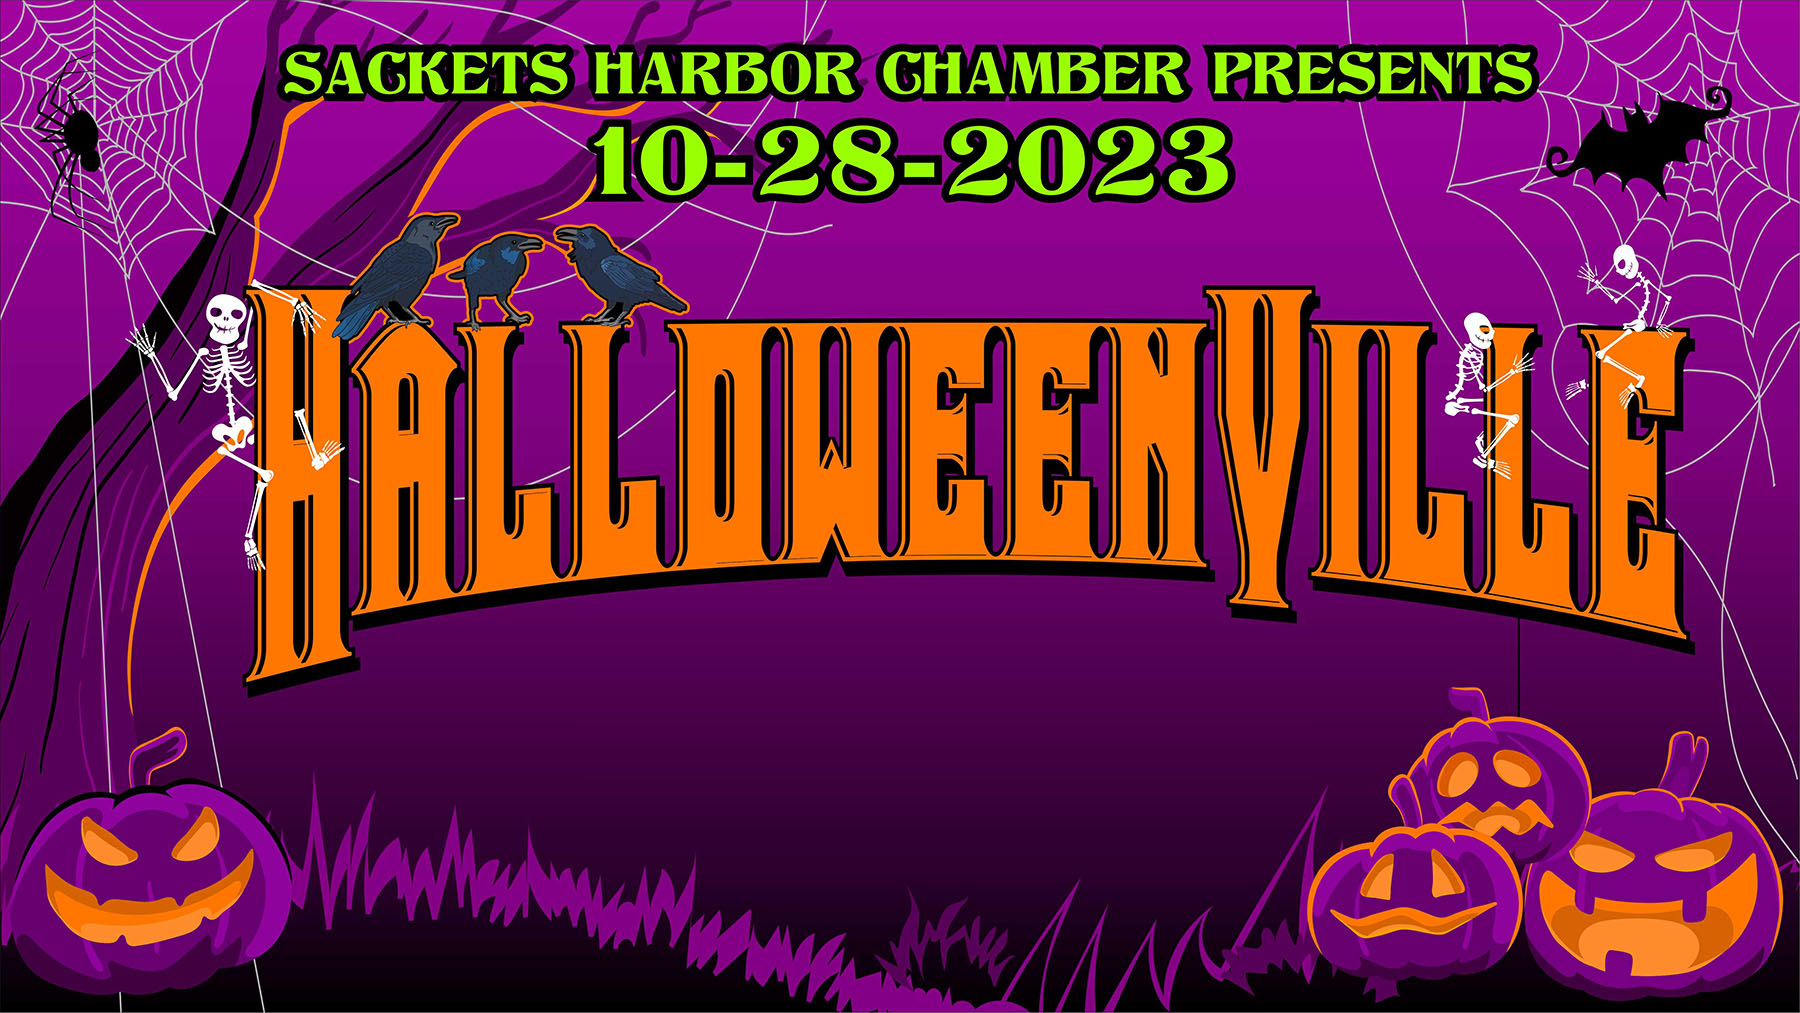 Colorful banner for the 2023 HalloweenVille event in Sackets Harbor